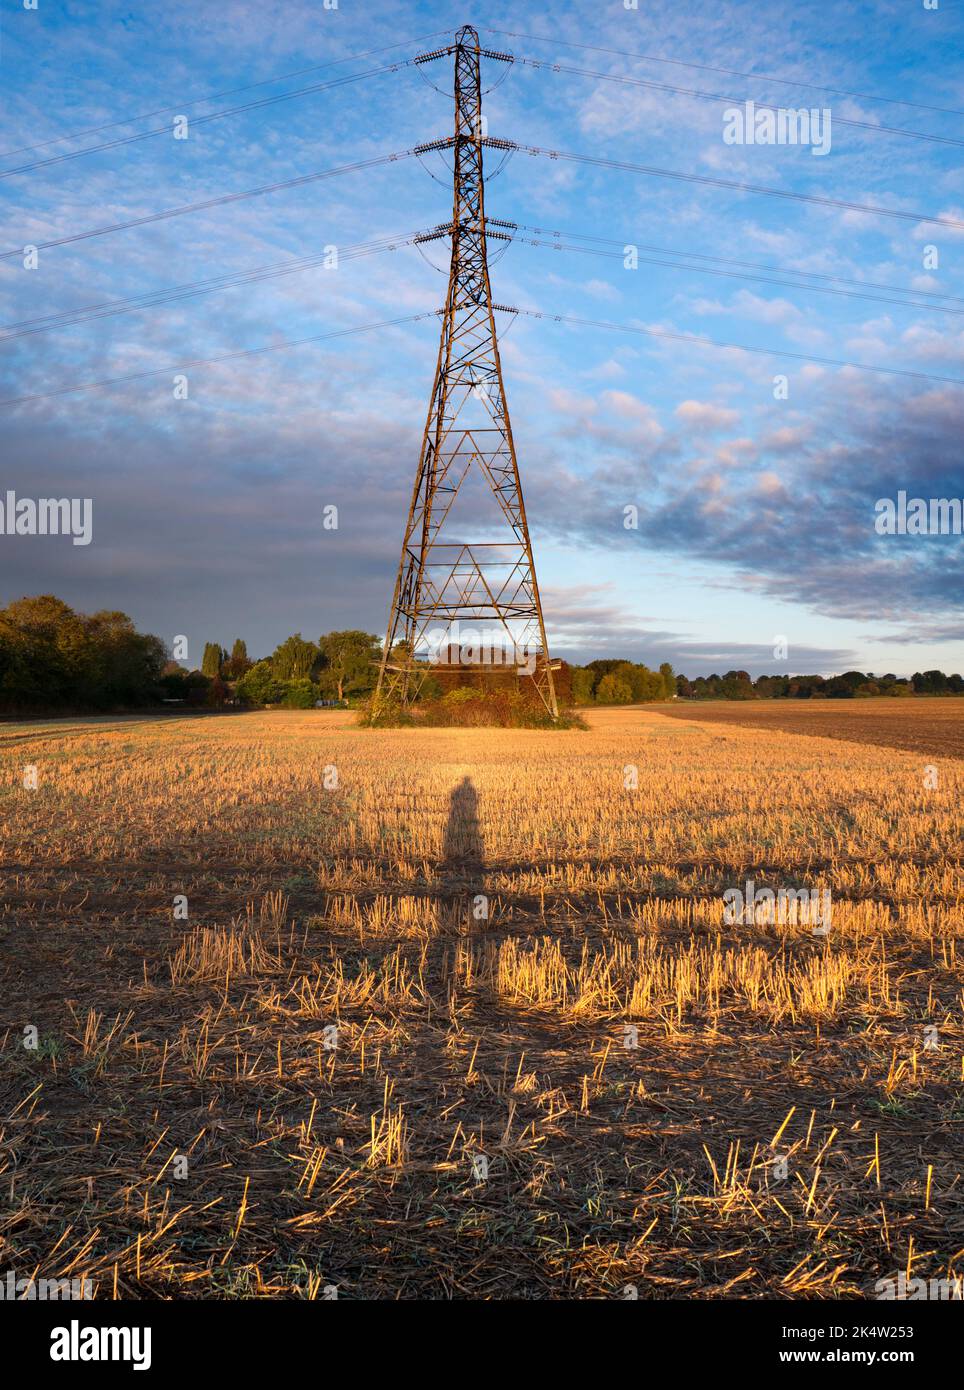 I love electricity pylons; I find their abstract, gaunt shapes endlessly fascinating. Here we see a giant specimen in a field in rural Radley, togethe Stock Photo